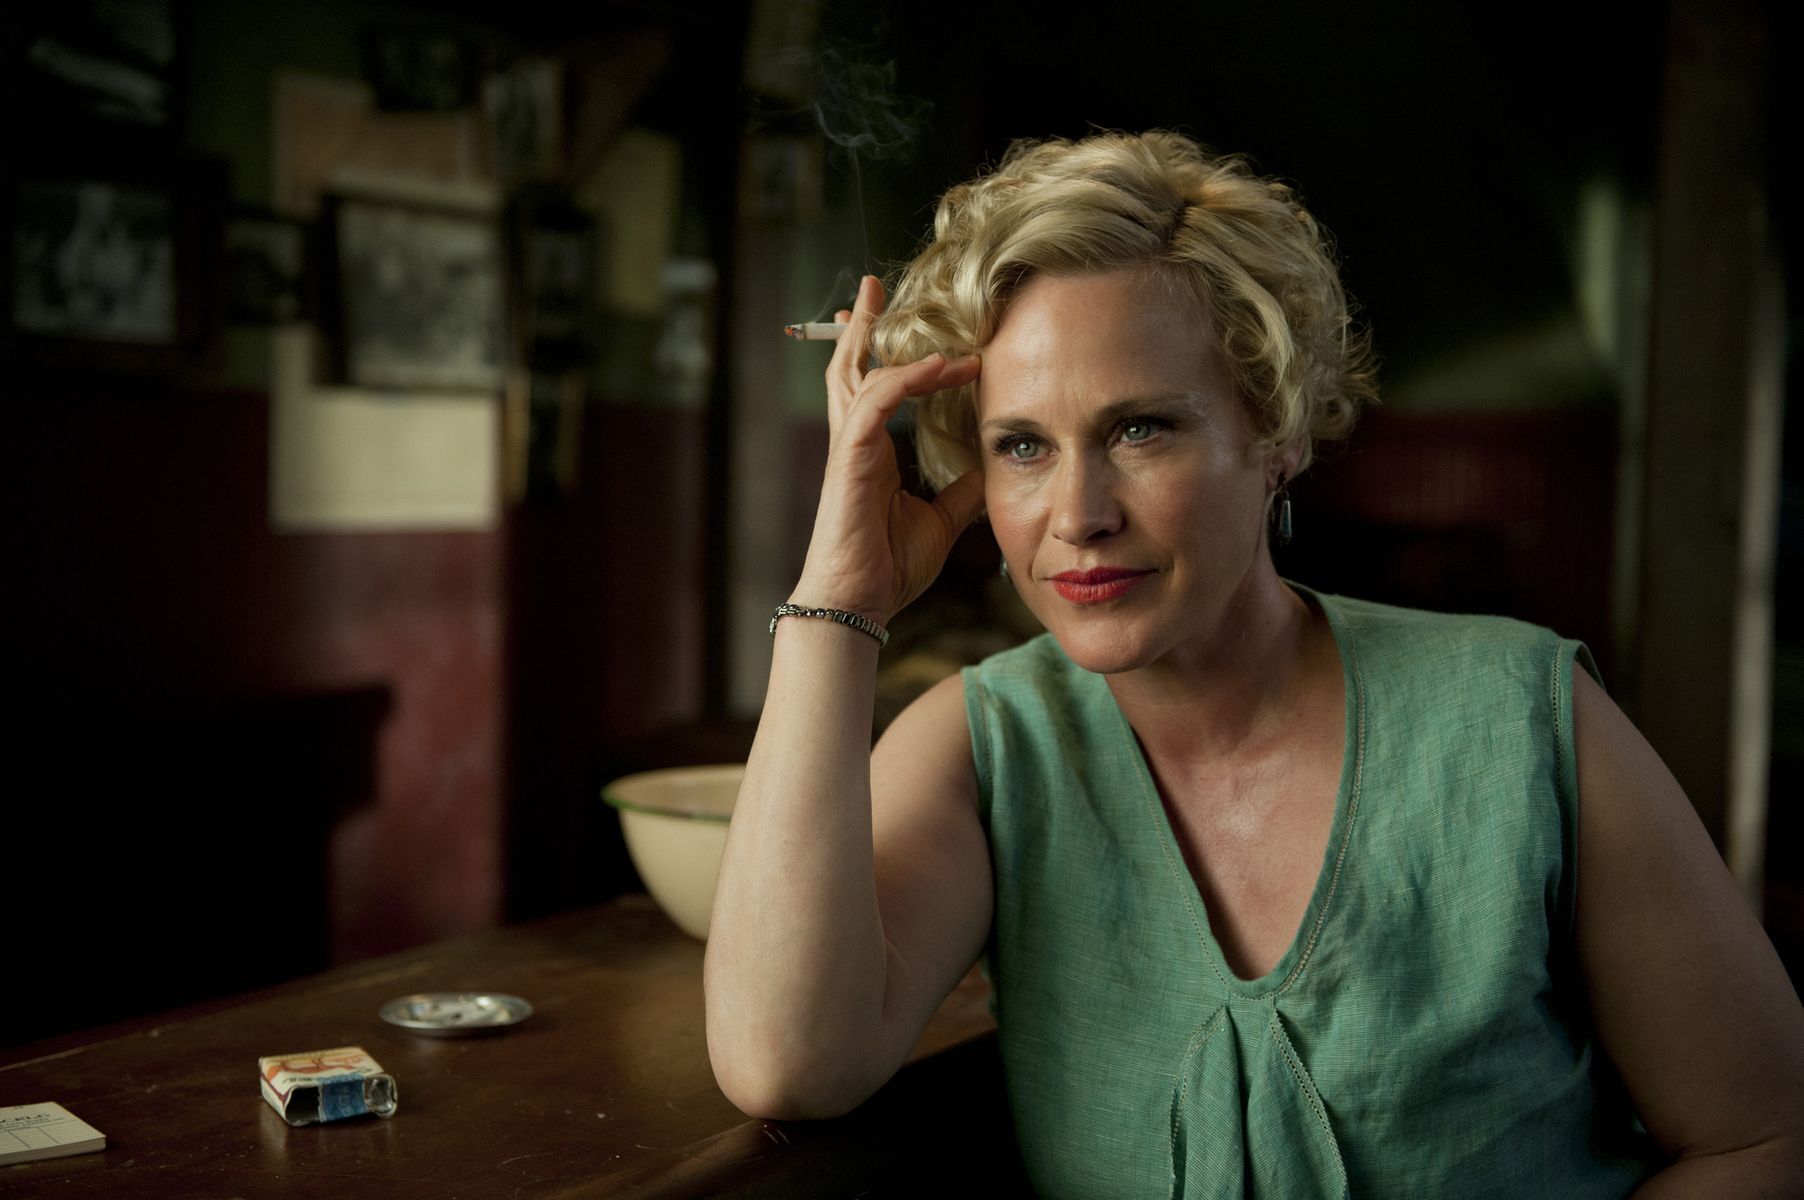 <p>From 2013 to 2014, Patricia Arquette made several appearances during the fifth season of this award-winning television series, which has taken home five Emmys, a Grammy, a Golden Globe, and more. Patricia Arquette plays Sally Wheet, the owner of a speakeasy during prohibition. Critics praised this Martin Scorsese-directed <a href="https://www.vulture.com/2013/10/boardwalk-empire-patricia-arquette-interview.html" rel="noreferrer noopener">gangster series</a>, often pointing out its impressive sets, makeup, direction and cast.</p>